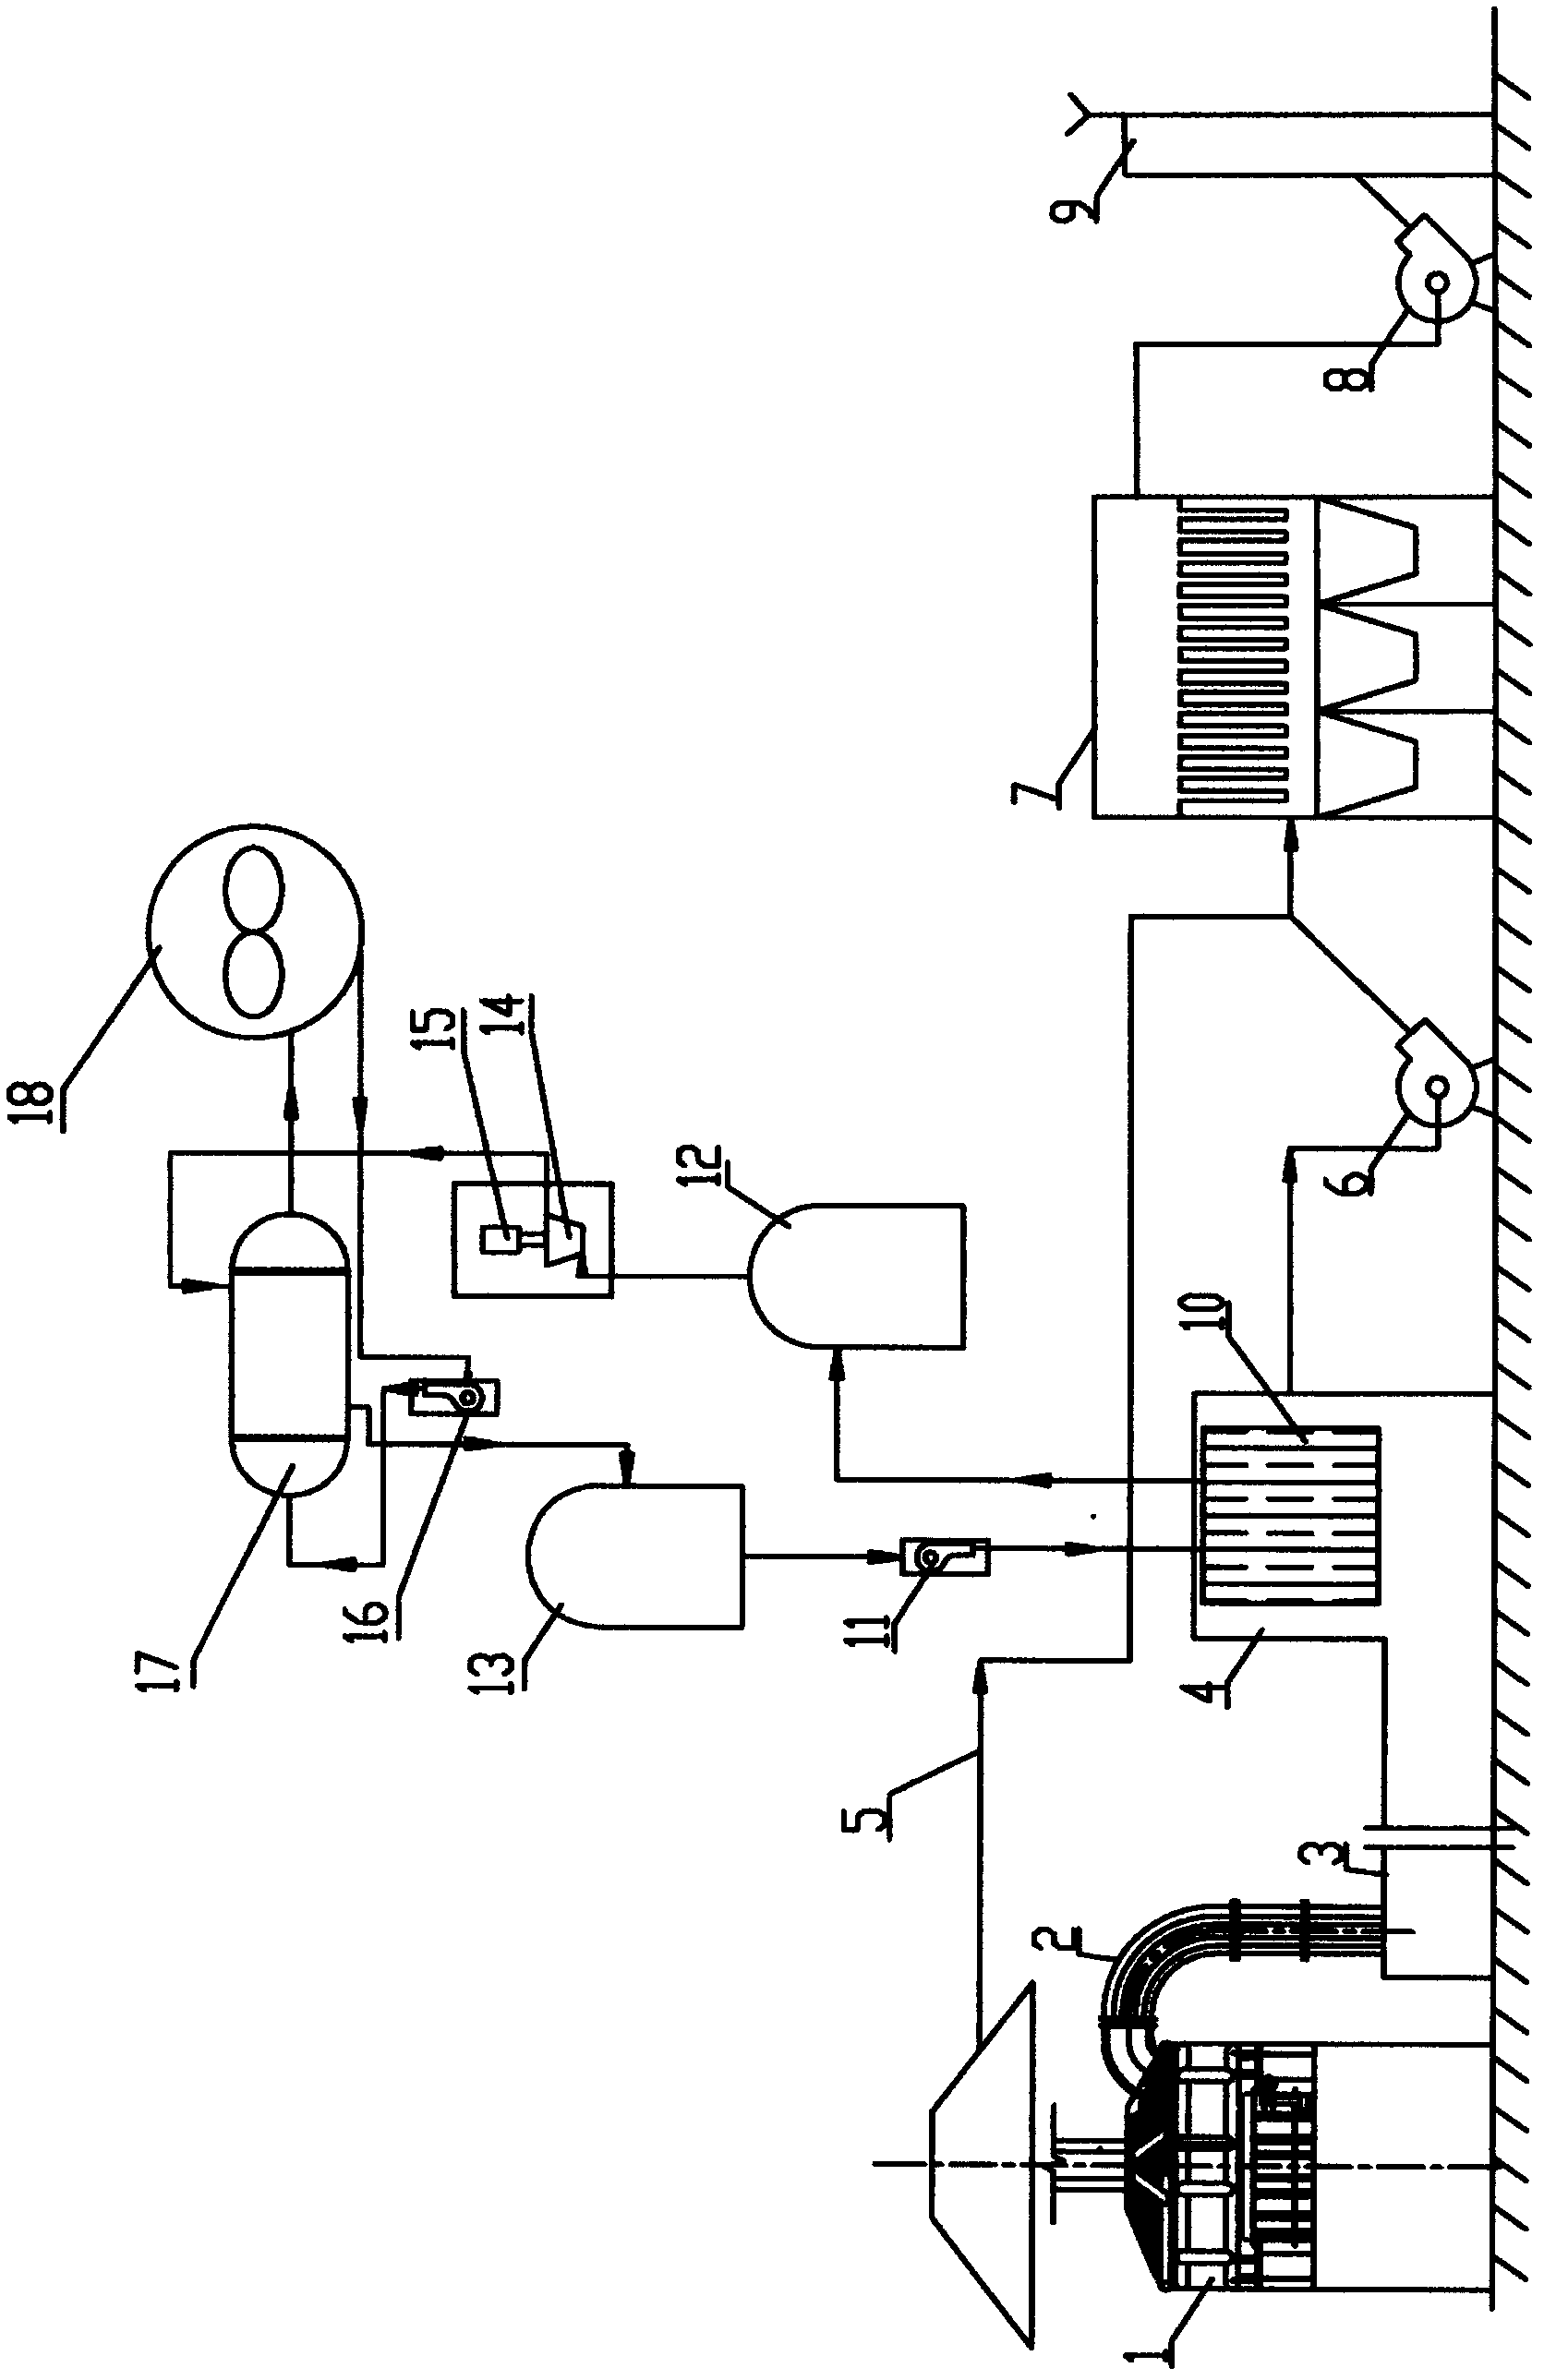 Integrated waste heat generating and dust removing method utilizing flue gas from interior and exterior of electric furnace